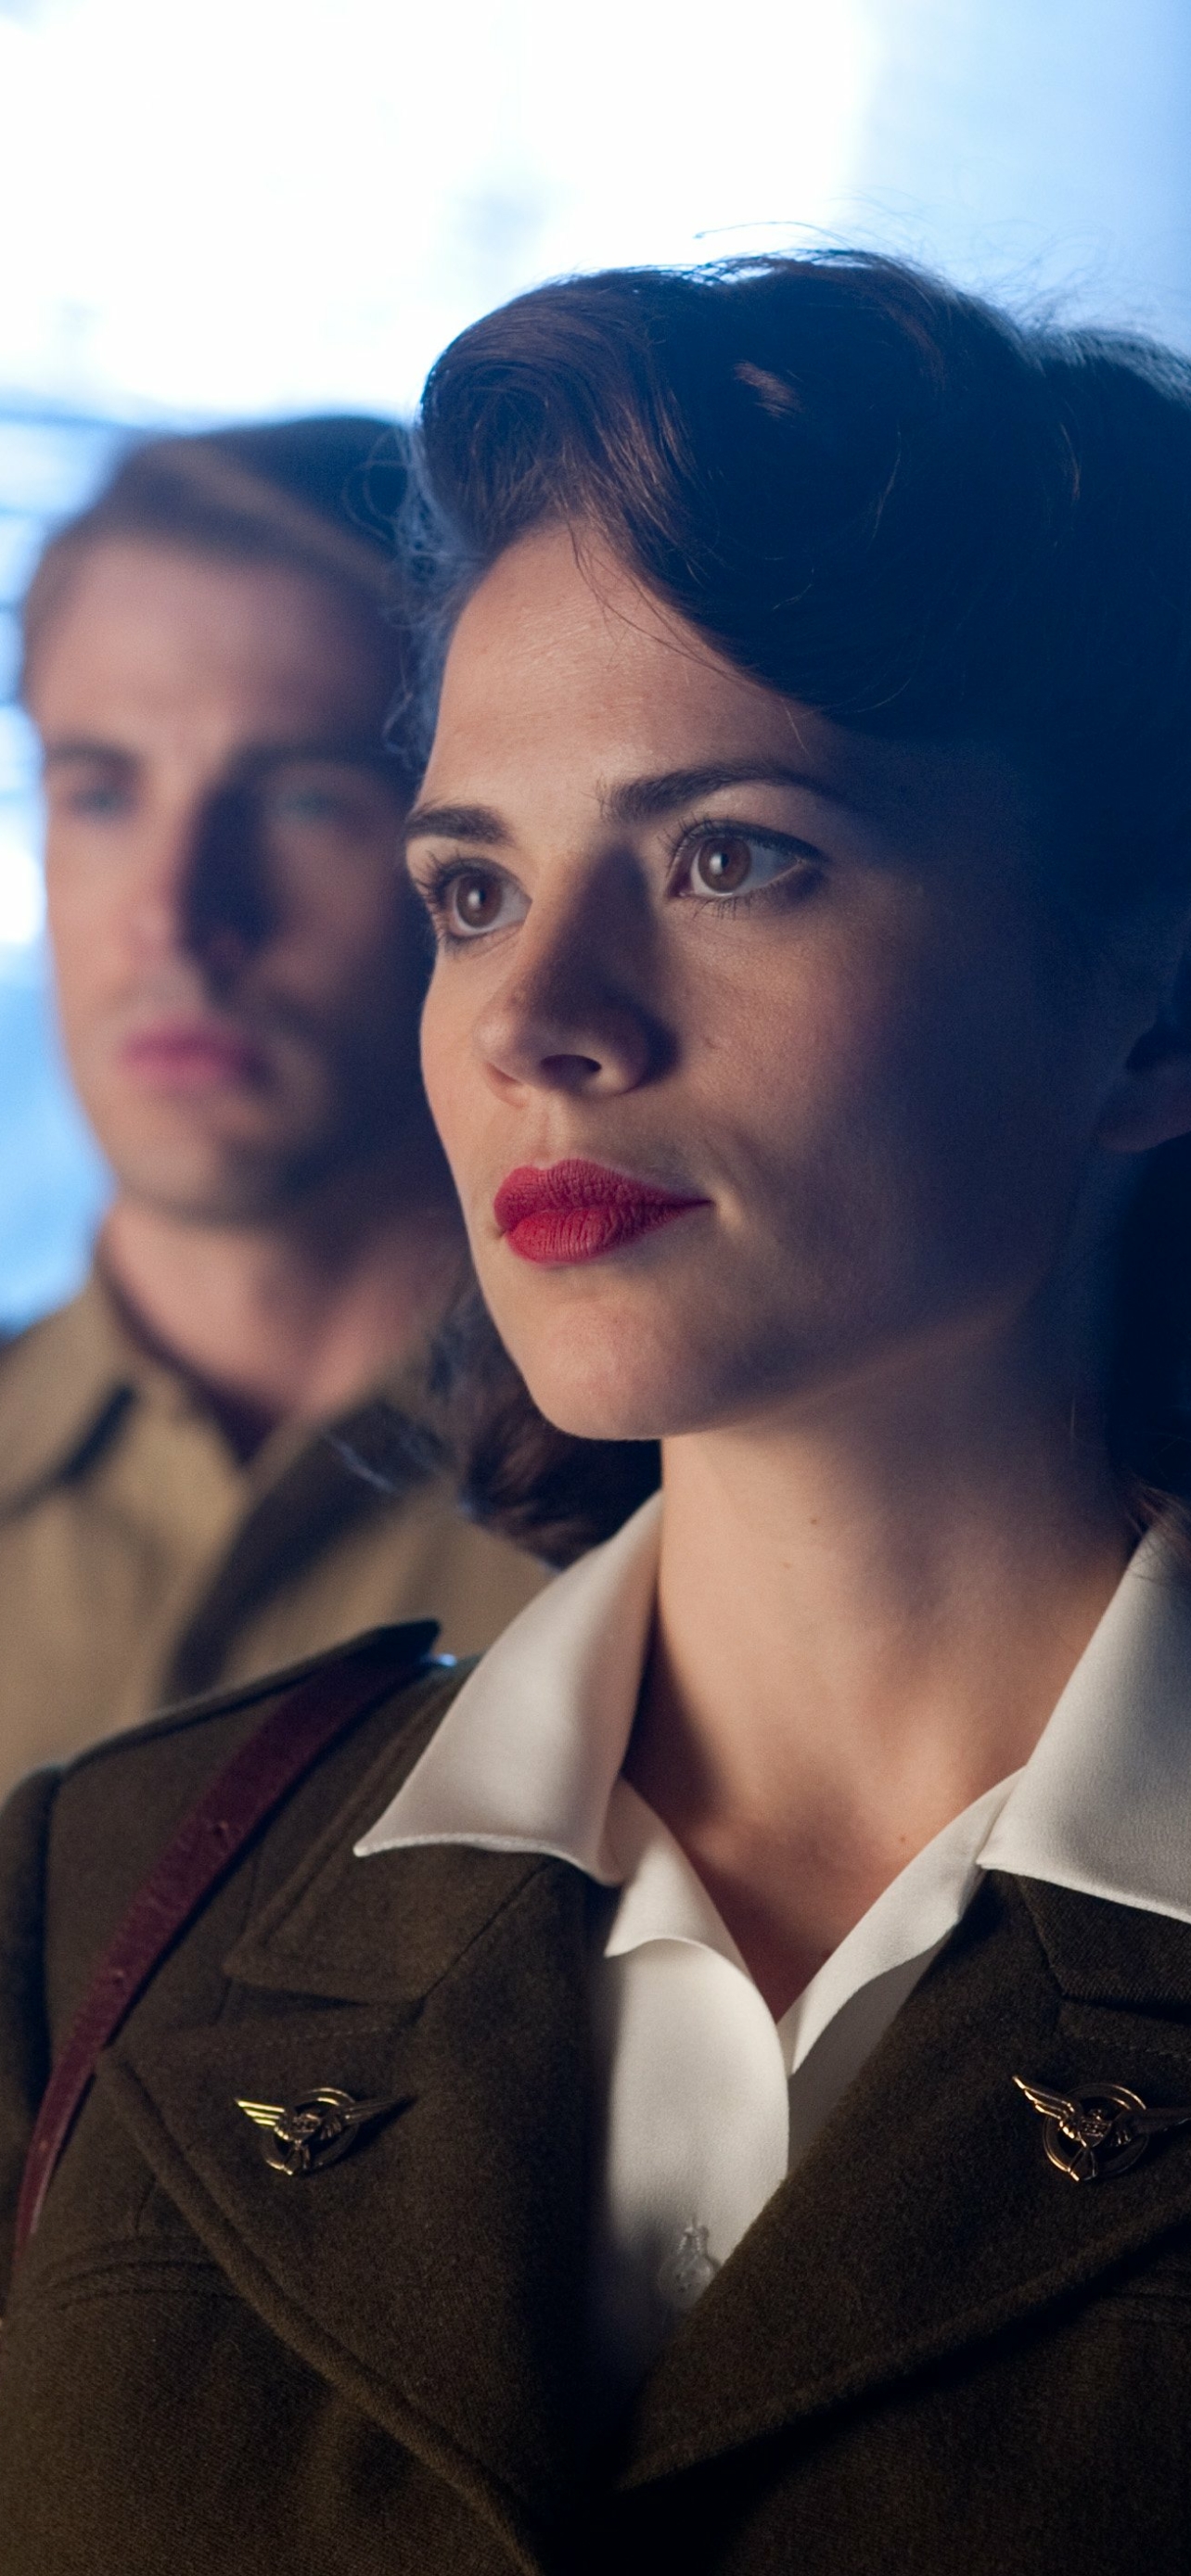 peggy carter, movie, captain america: the first avenger, hayley atwell, chris evans, captain america, steve rogers wallpapers for tablet